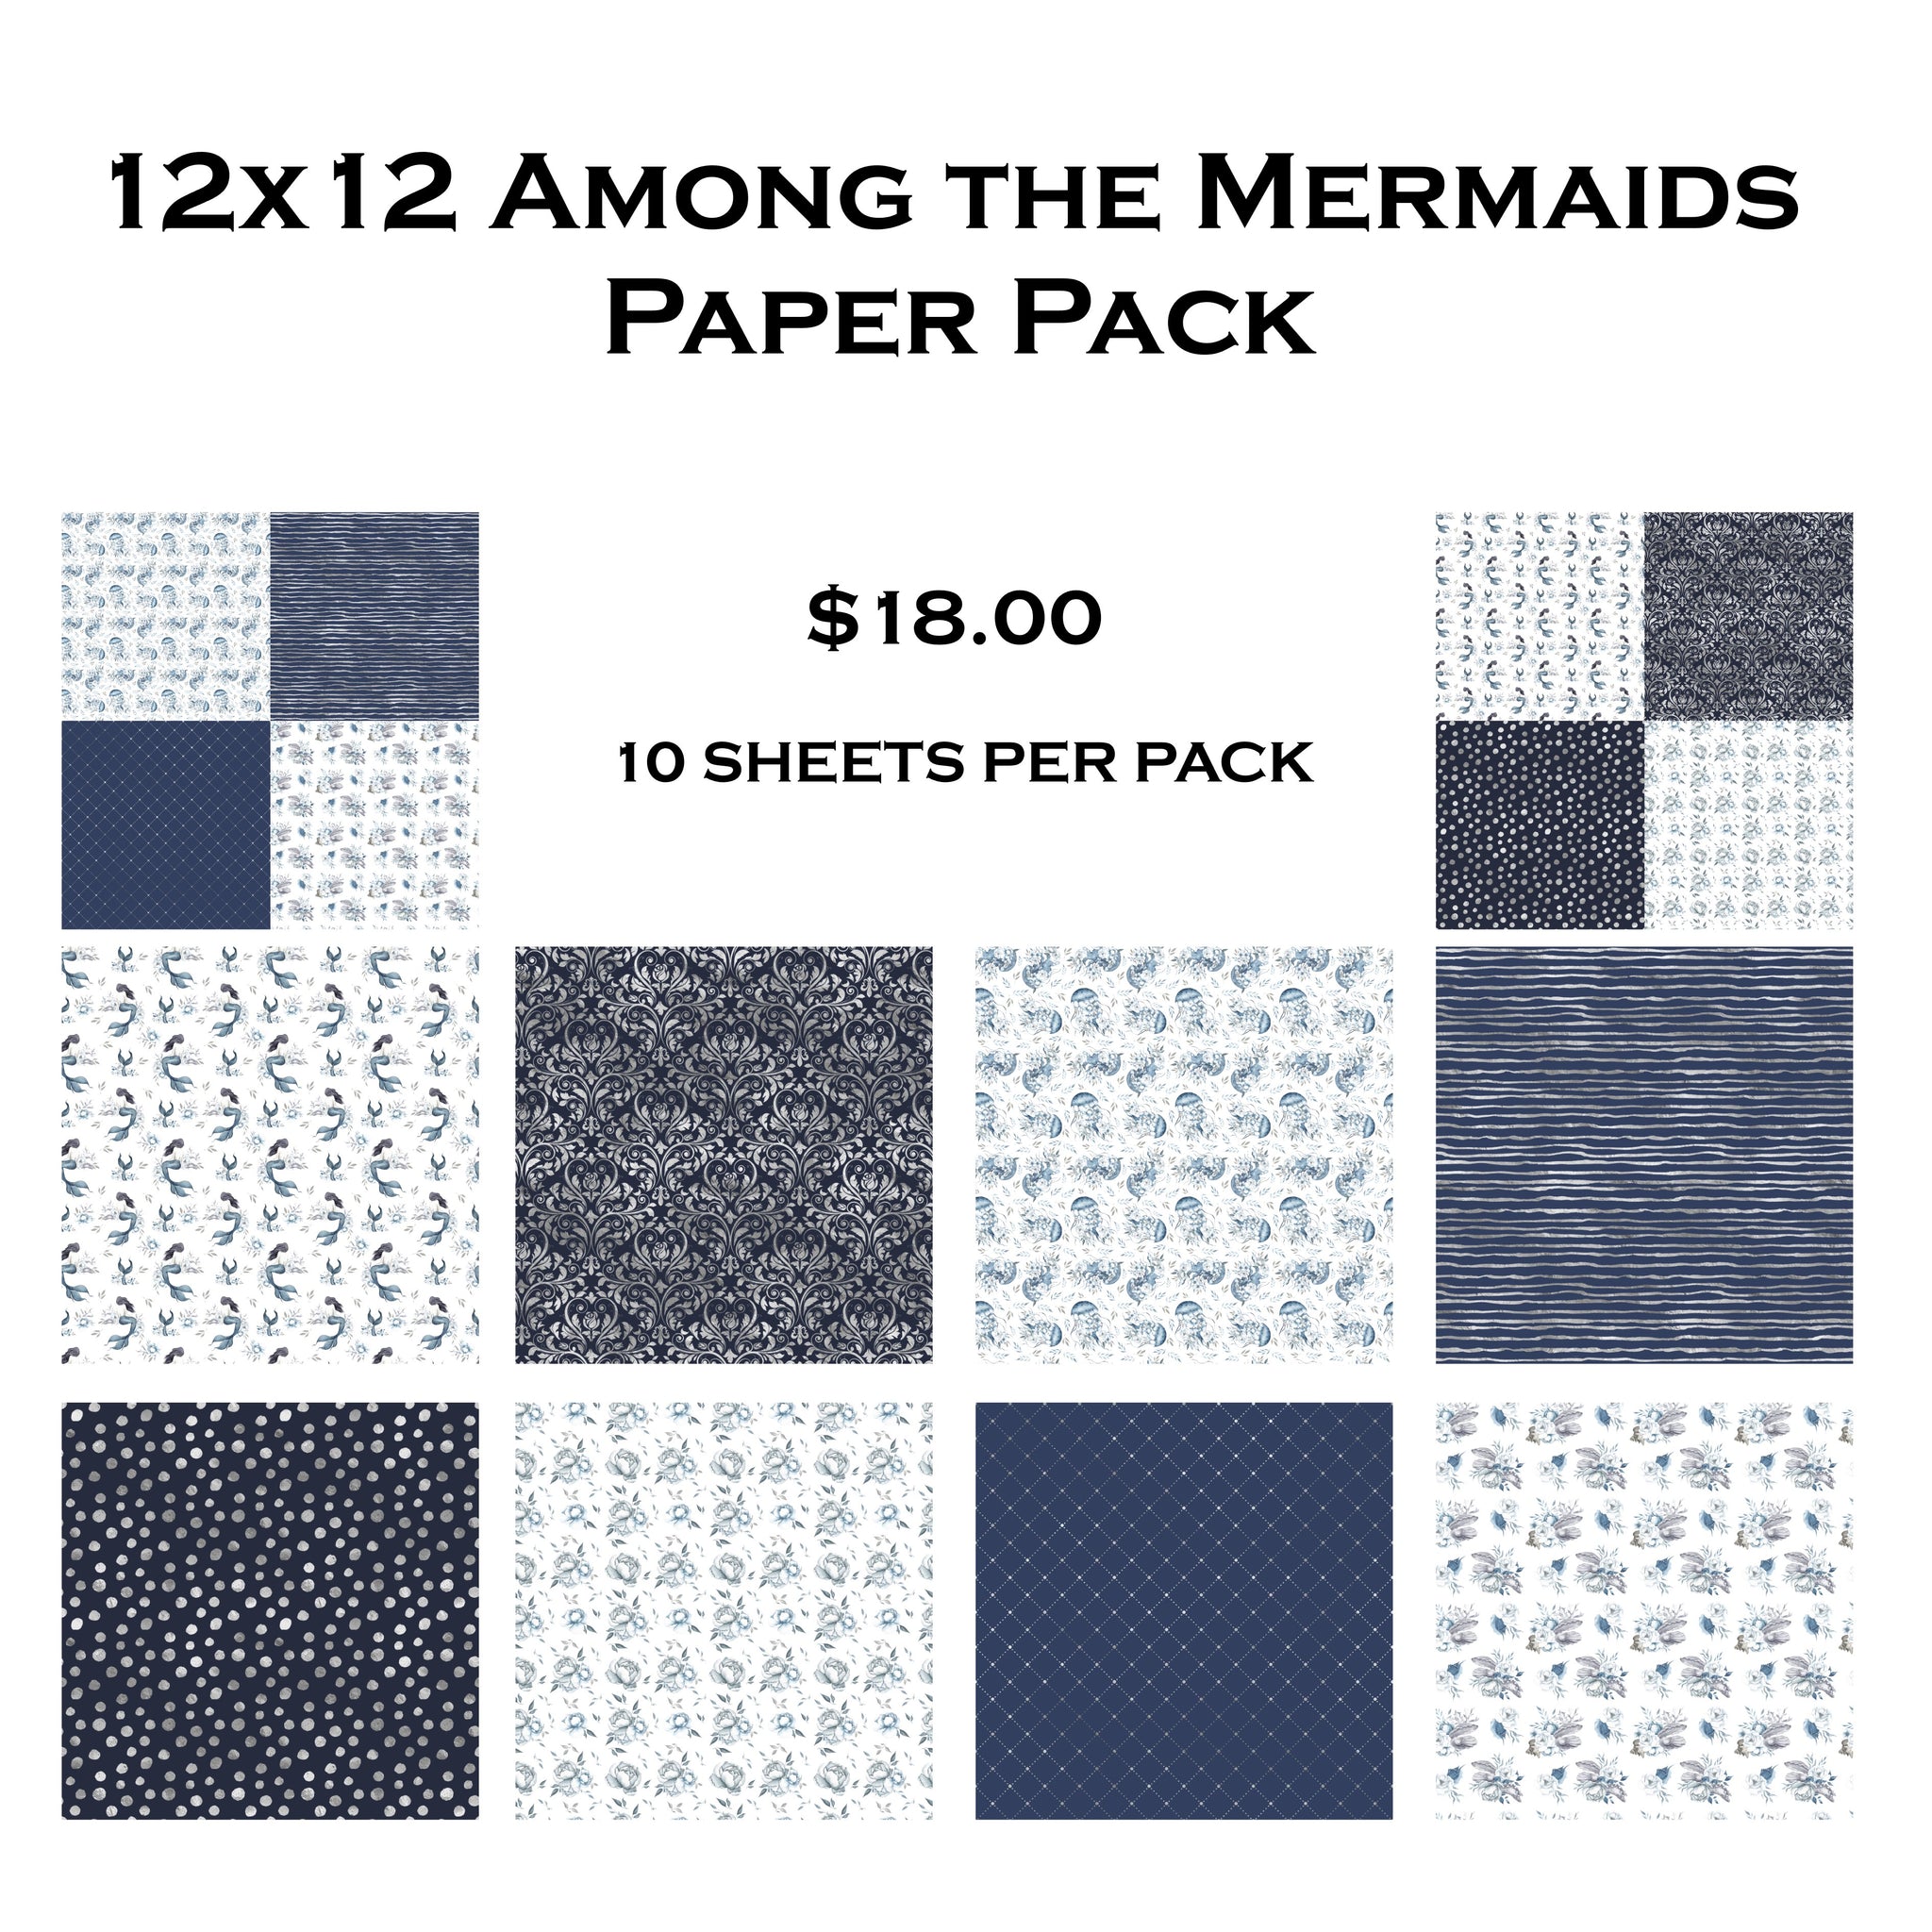 Among the Mermaids 12x12 Paper Pack